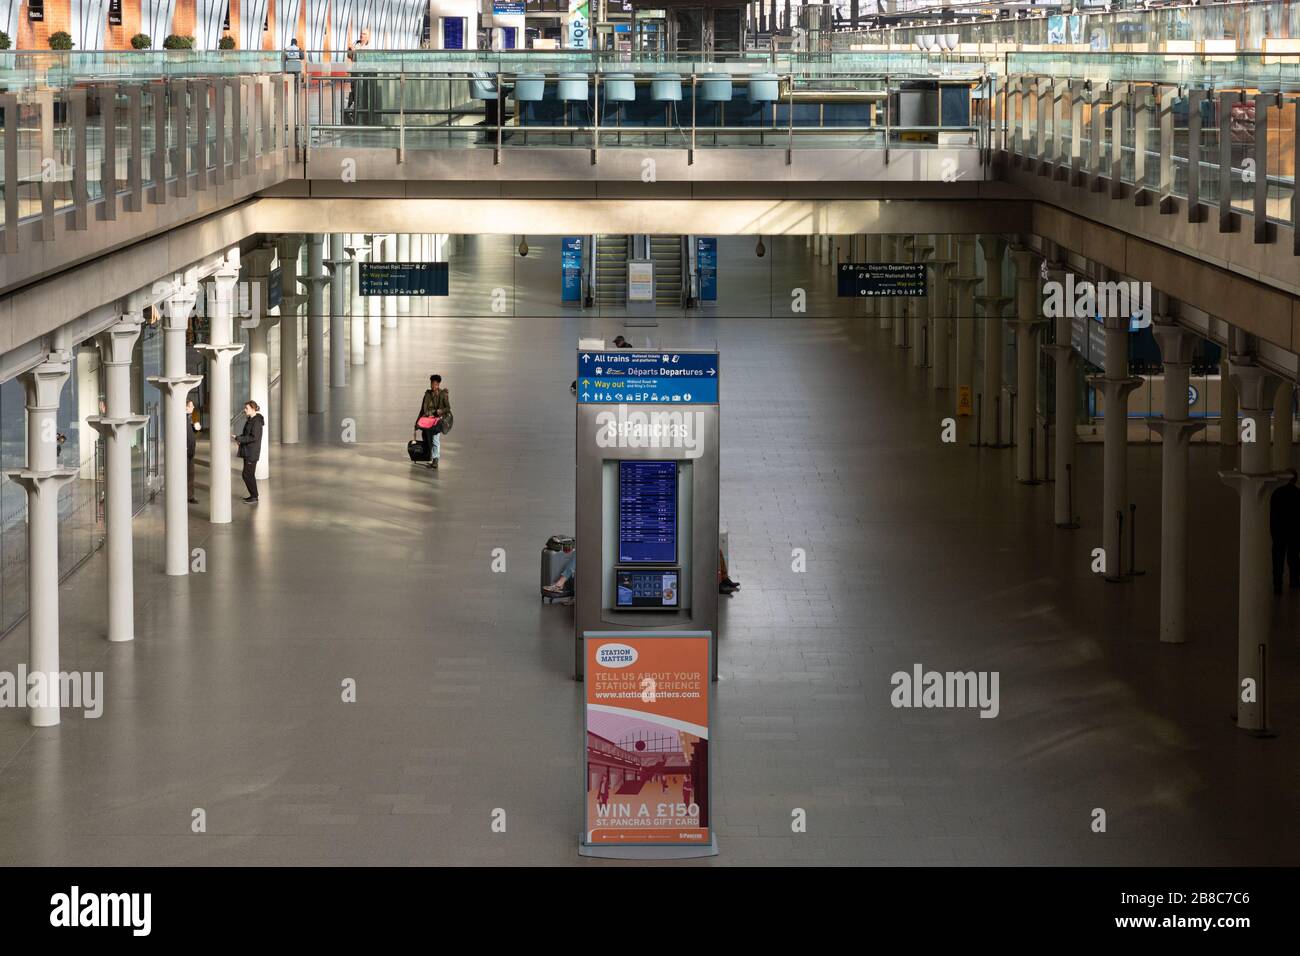 London St Pancras International Station deserted during Covid-19 pandemic 2020 Stock Photo